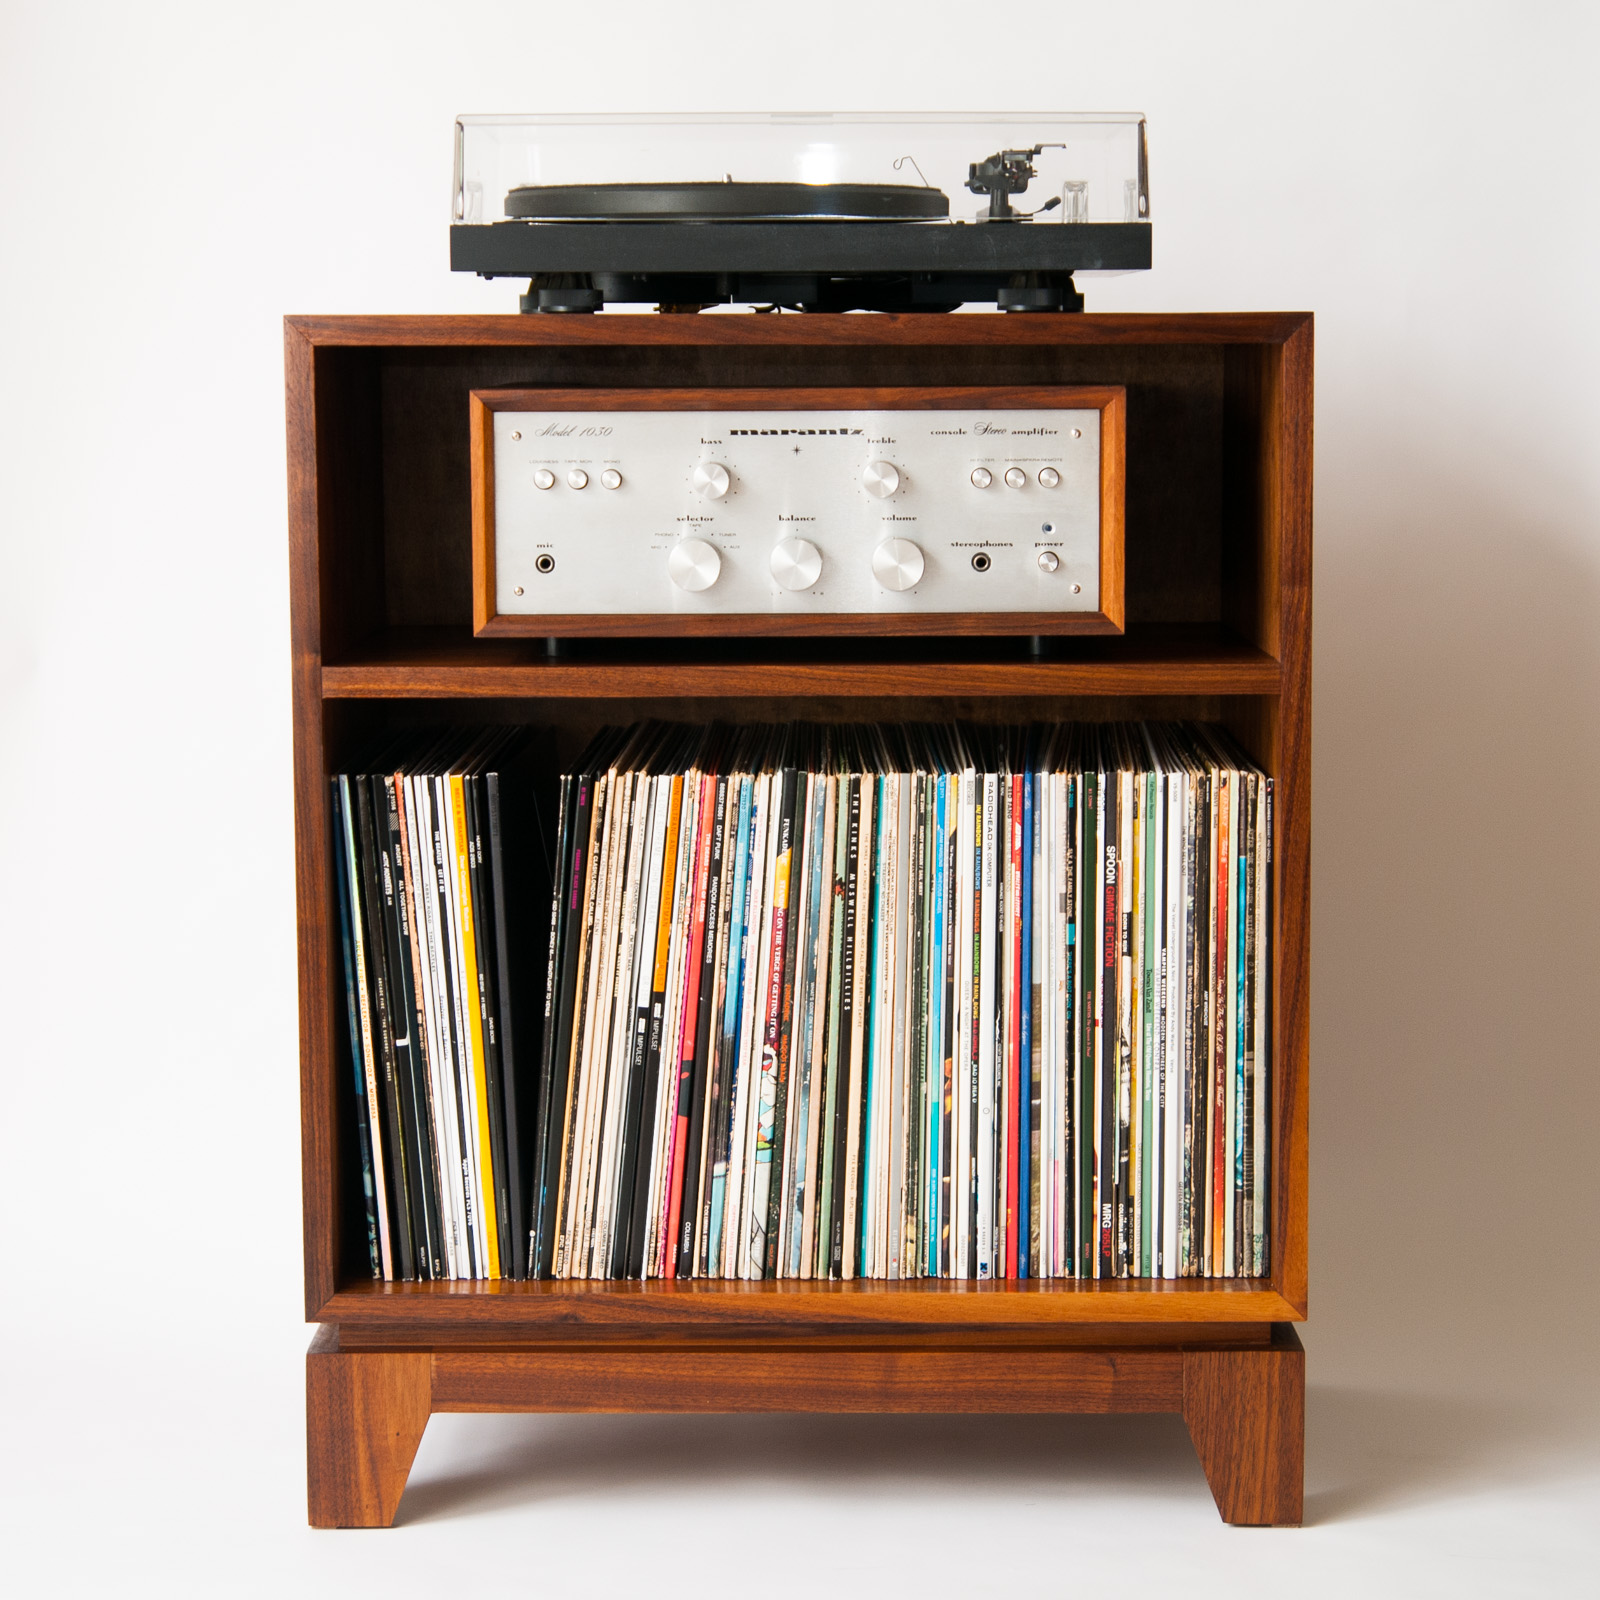 Stereo cabinet with equipment and records